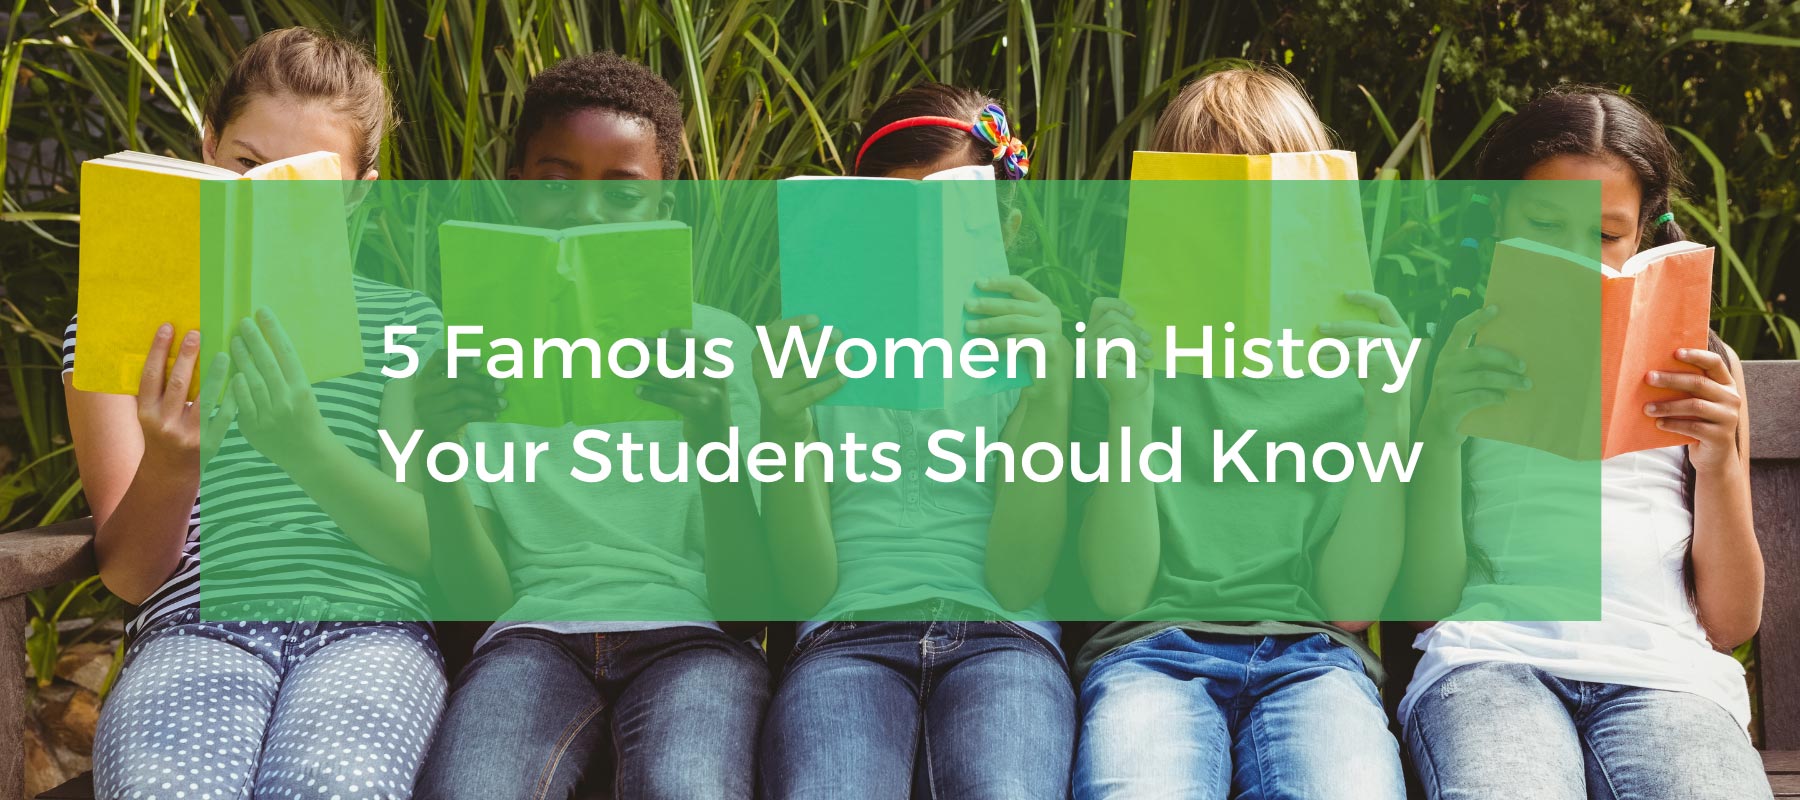 5 Famous Women in History Your Students Should Know